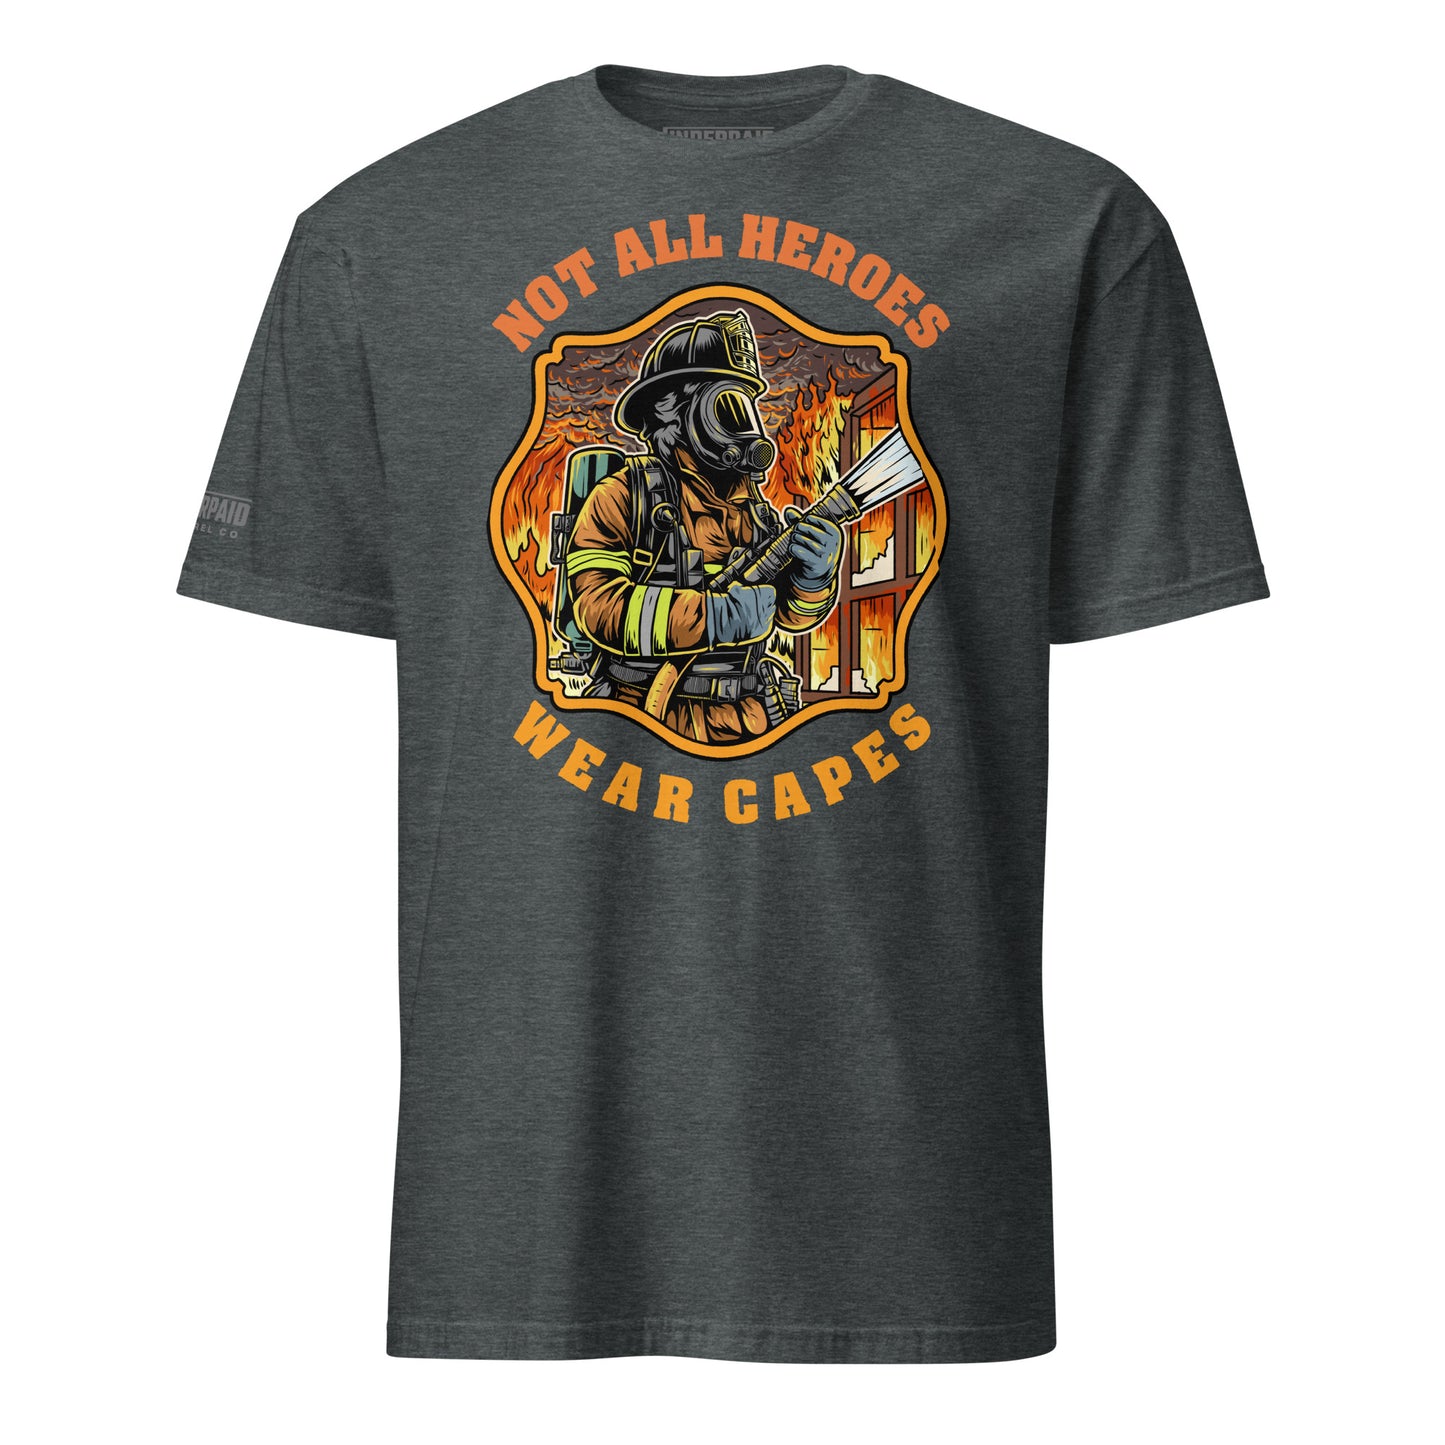 Fireman tee featuring graphic design in full color